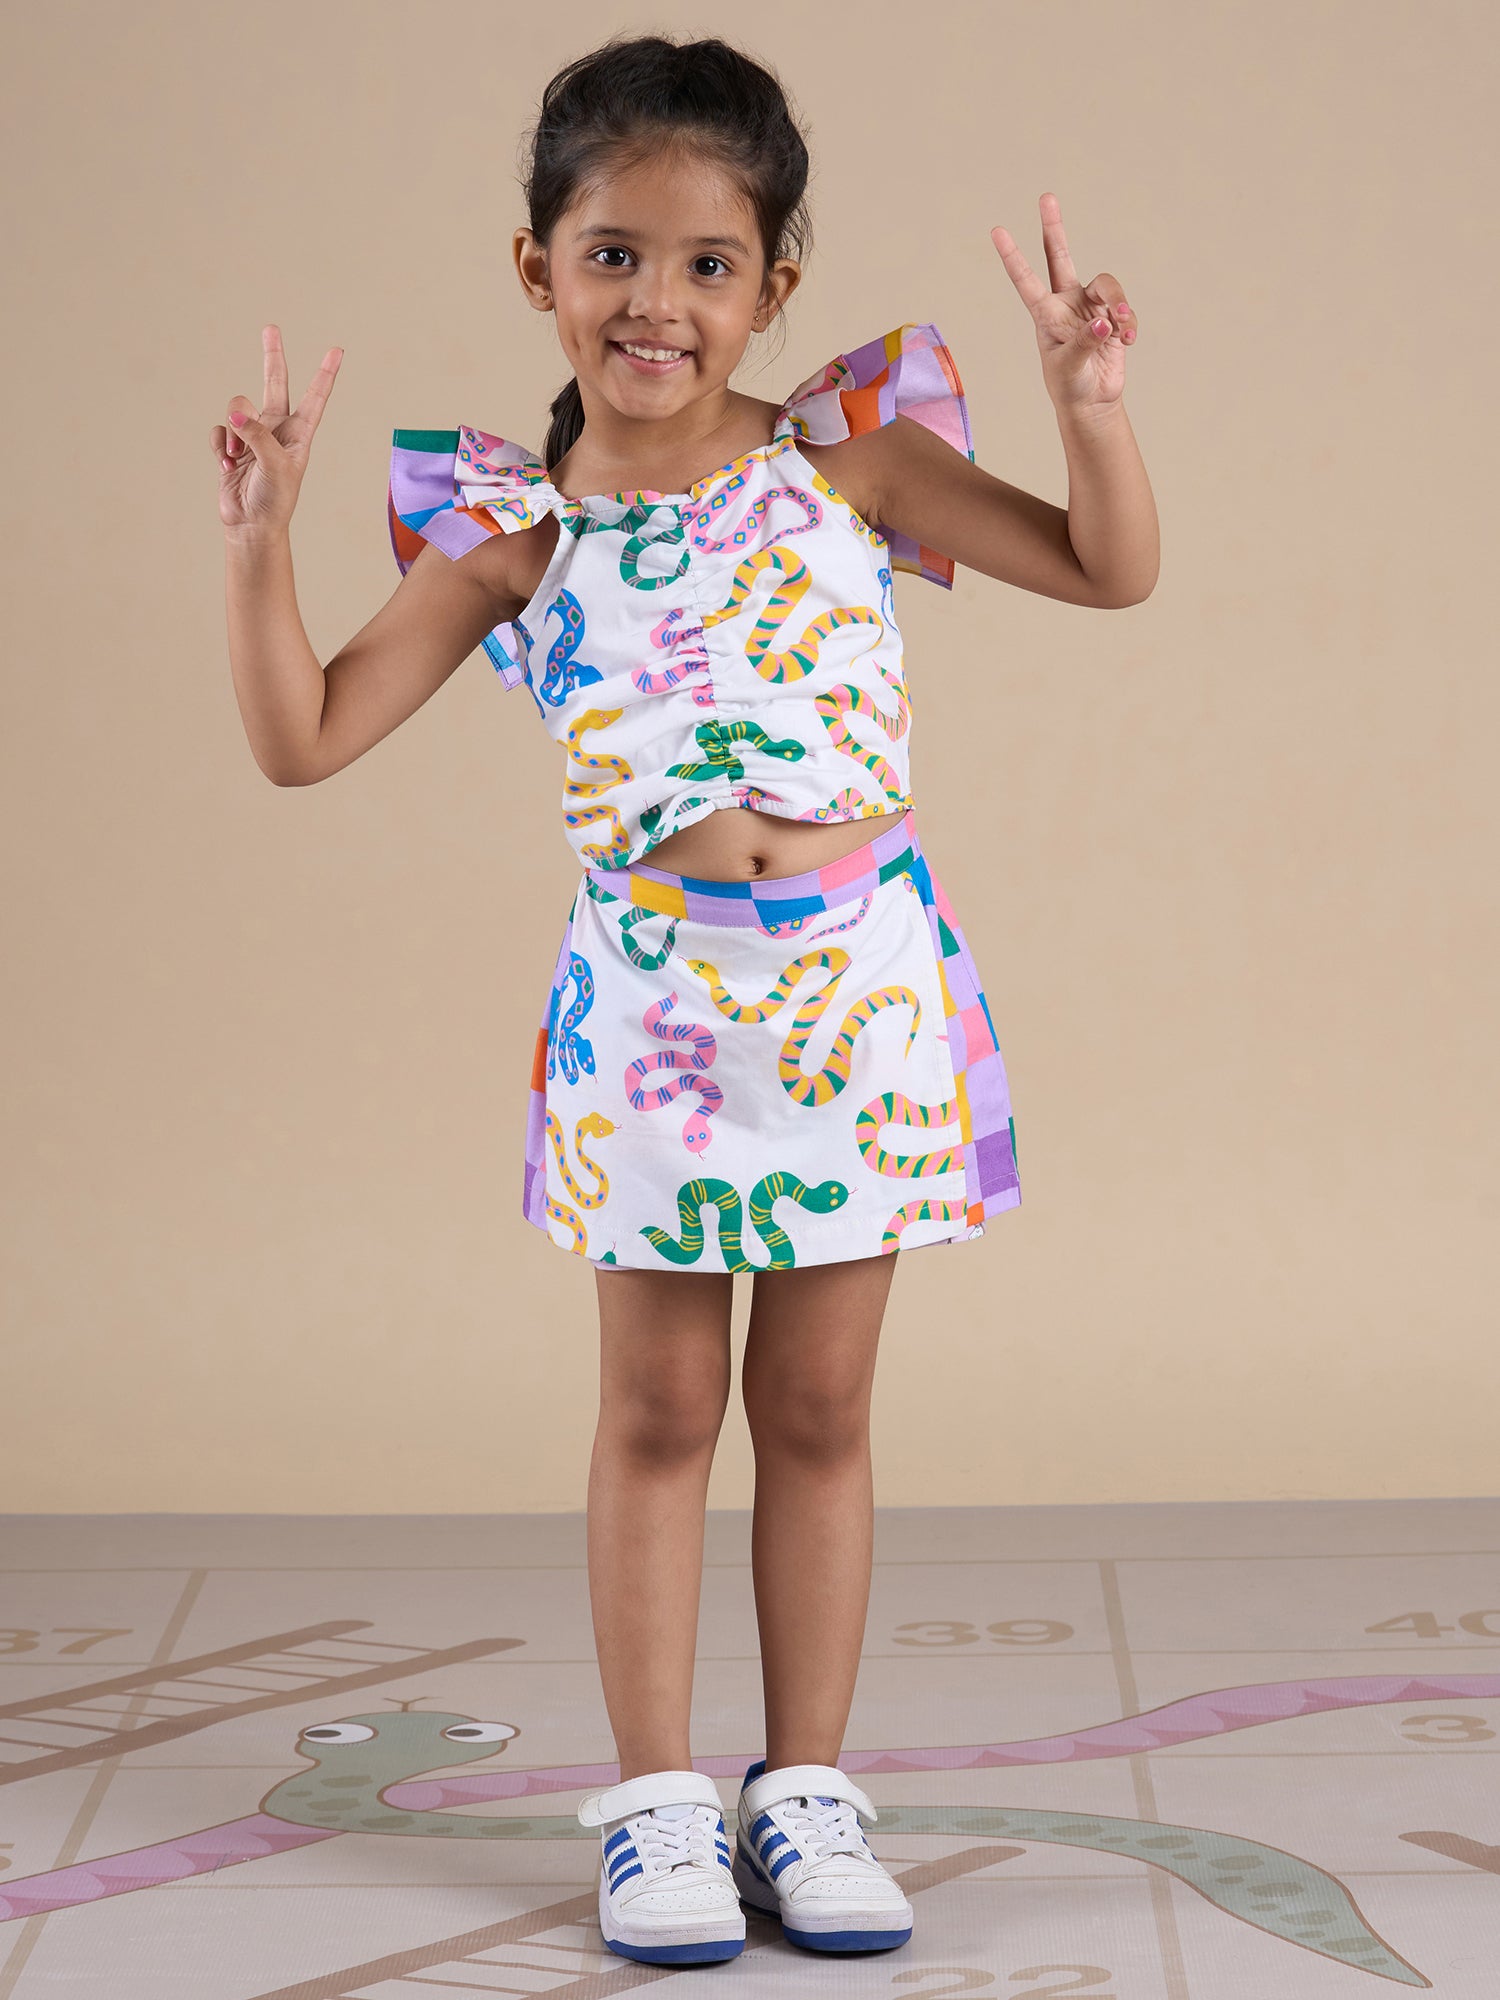 Snakes And Ladders Girls Multi Color Snake Print Top And Shorts Set From Siblings Collection - Lil Drama